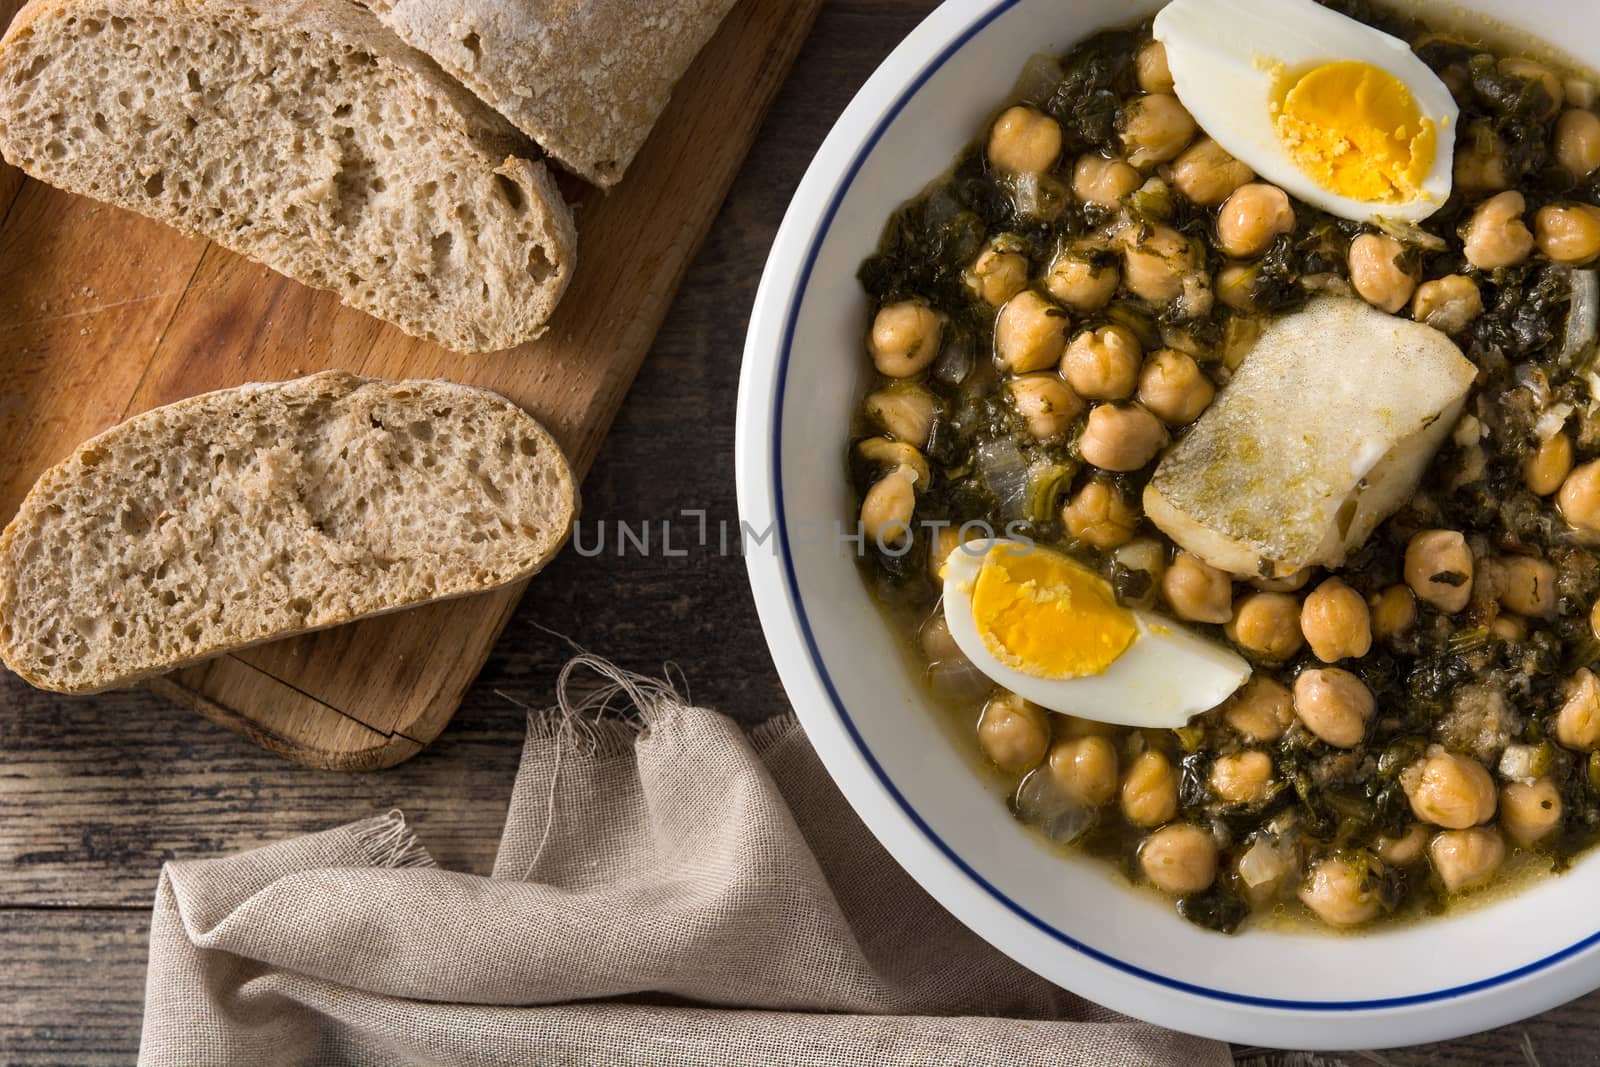 Chickpea stew with spinach and cod or potaje de vigilia. Typical spanish food for Easter holidays.